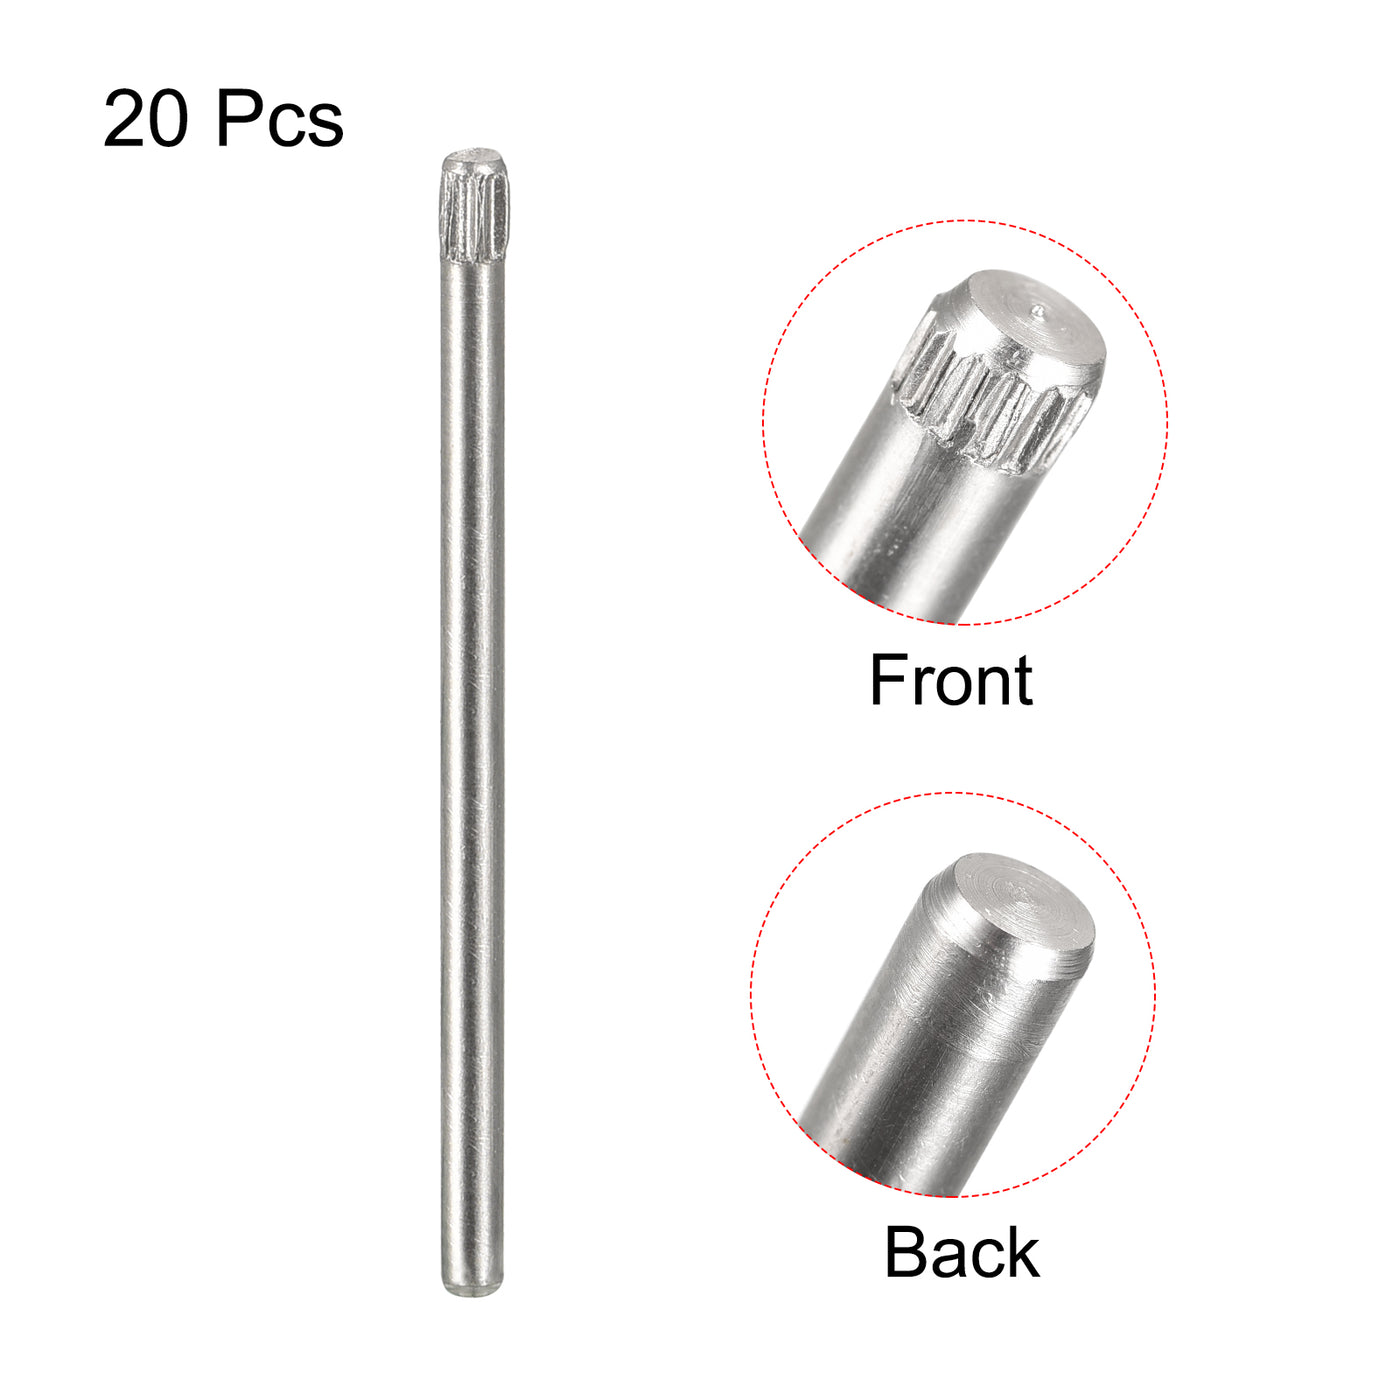 uxcell Uxcell 1.5x30mm 304 Stainless Steel Dowel Pins, 20Pcs Knurled Head Flat End Dowel Pin